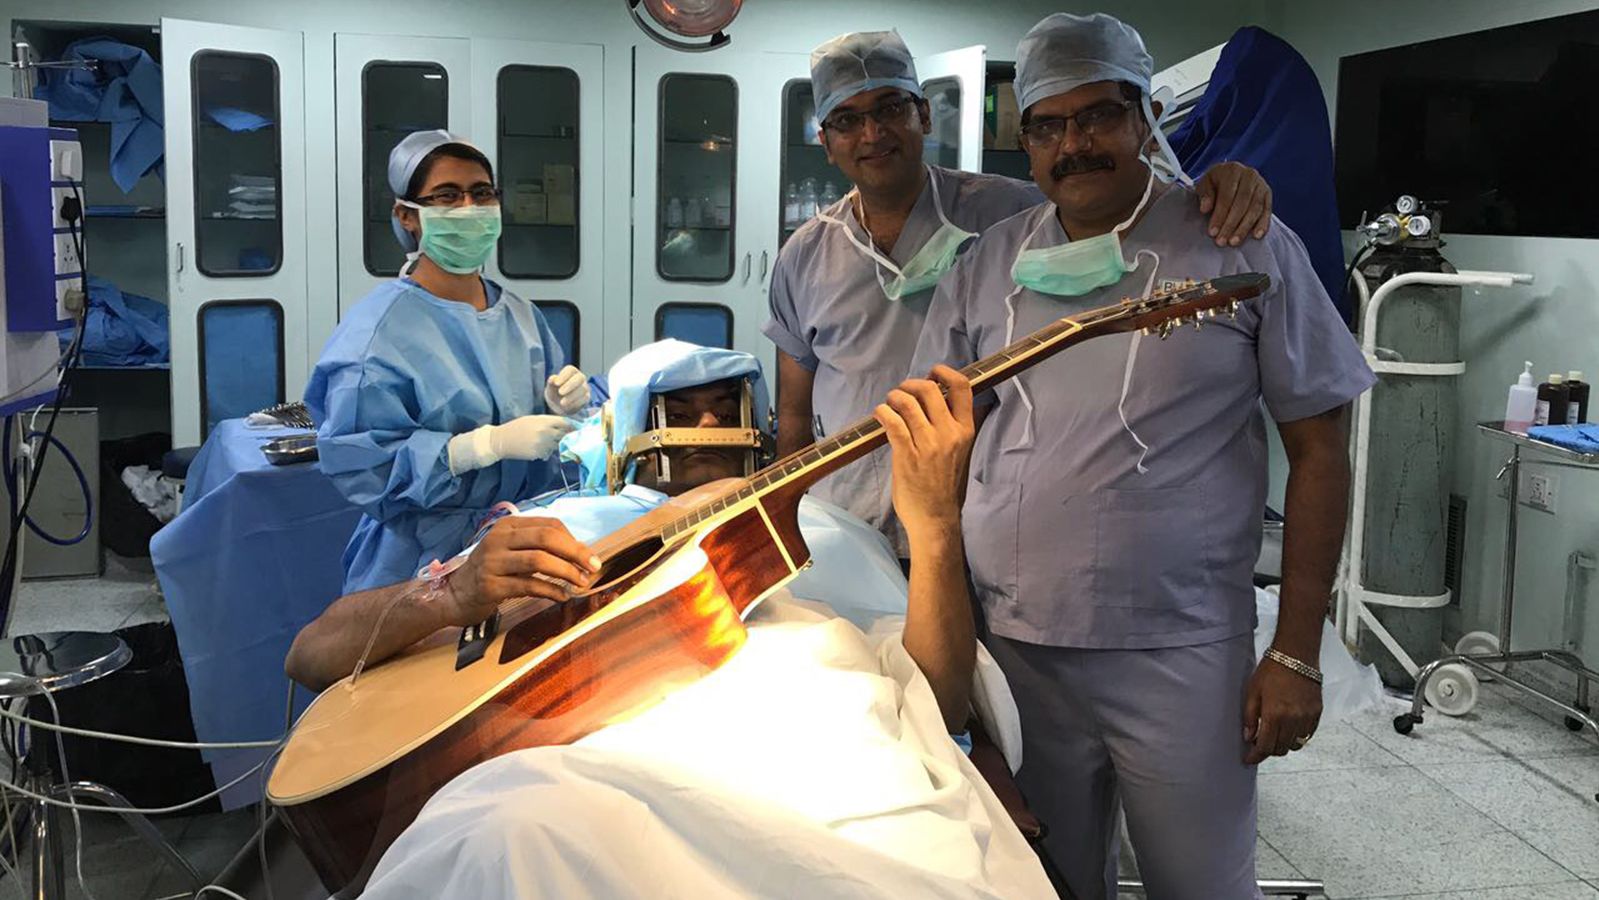 Abhishek Prasad was awake and encouraged to play the guitar while undergoing brain surgery on July 11, 2017, in Bangalore, India.